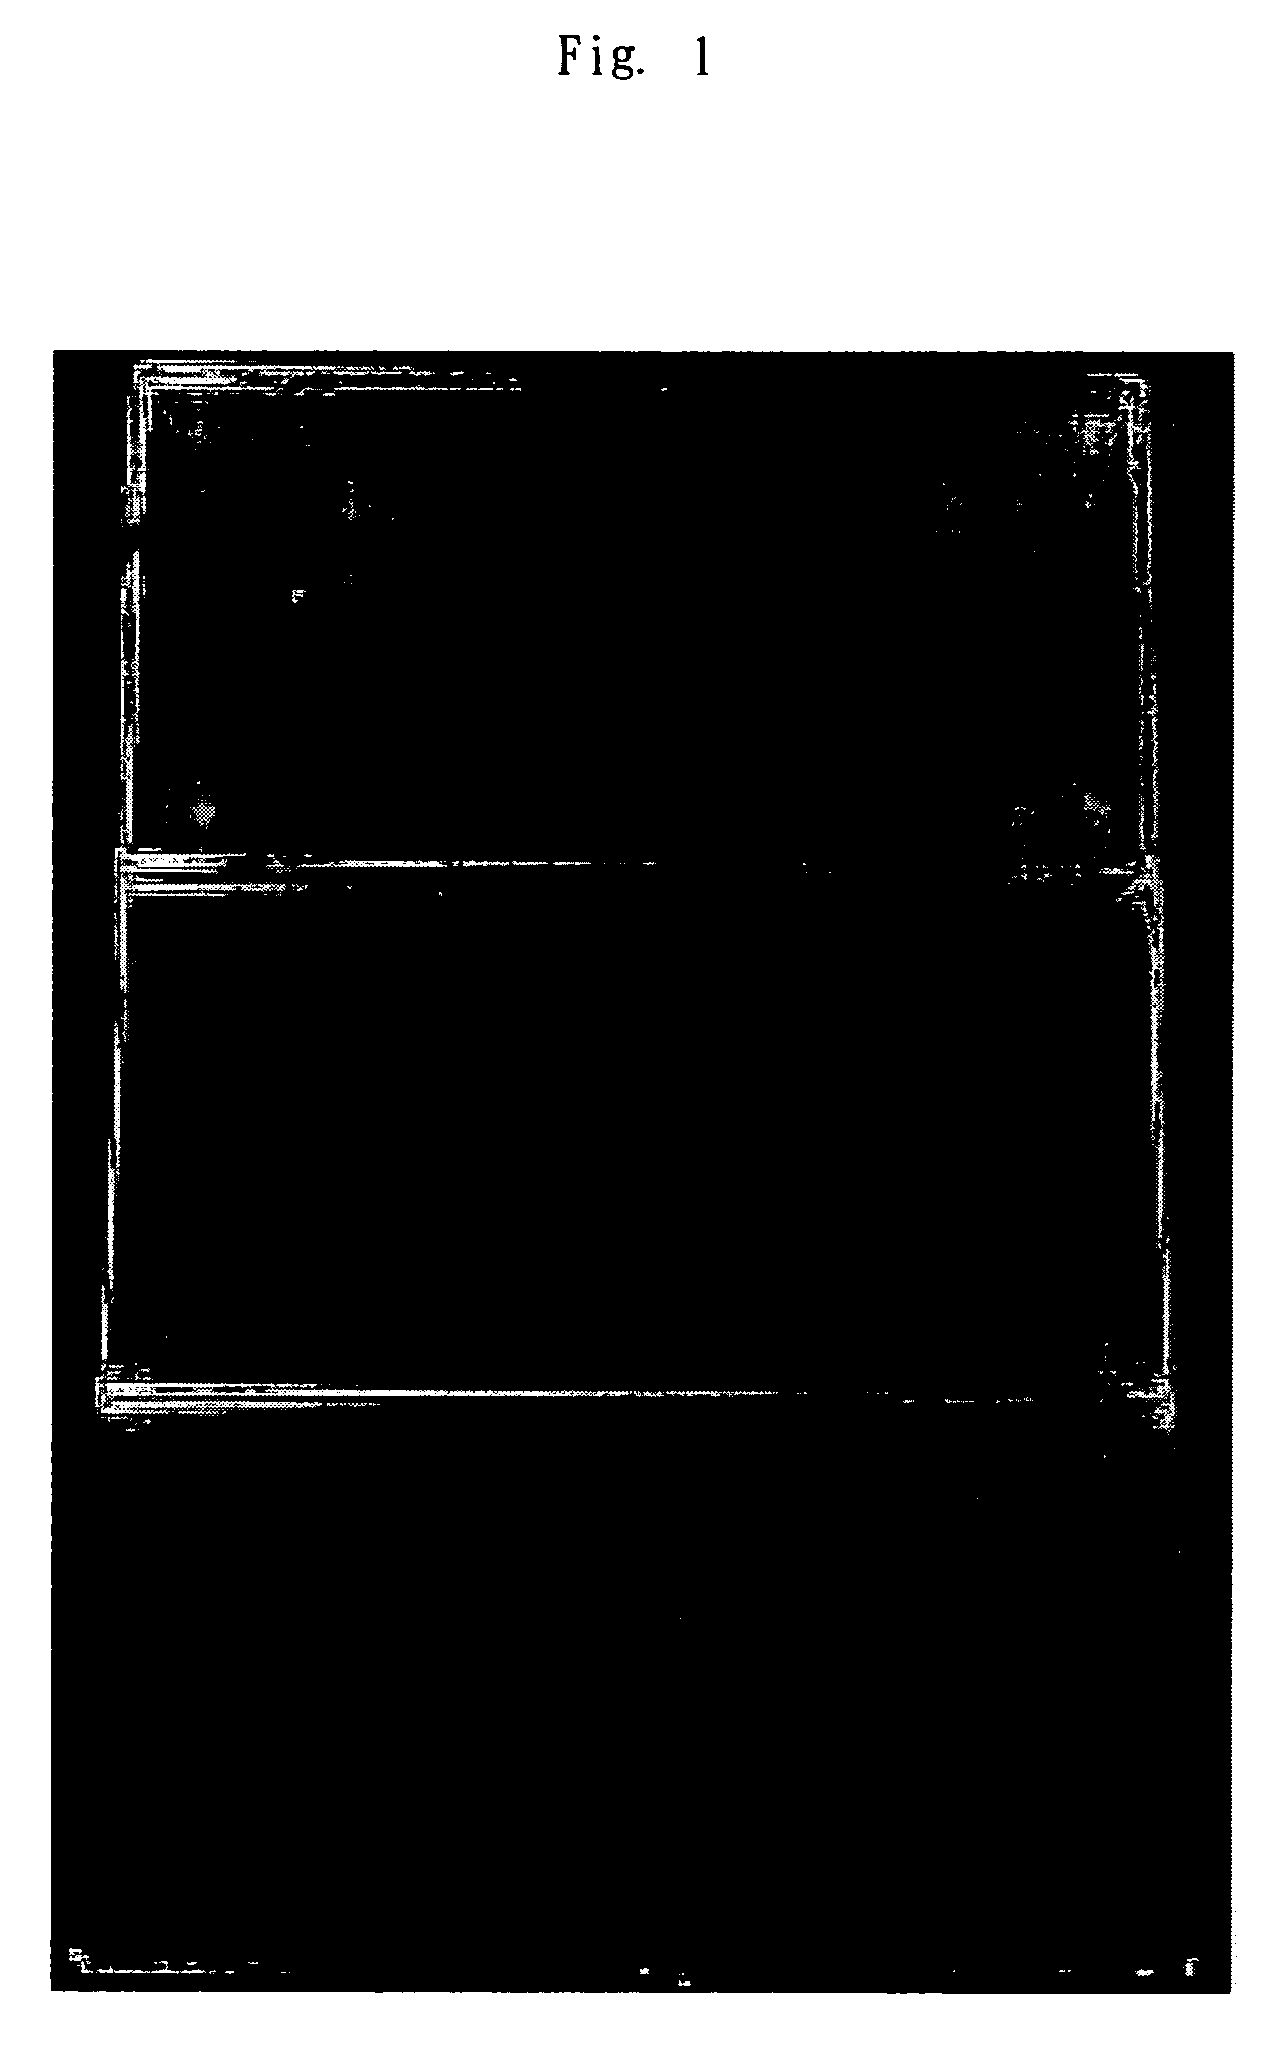 Resin composition and molded articles thereof